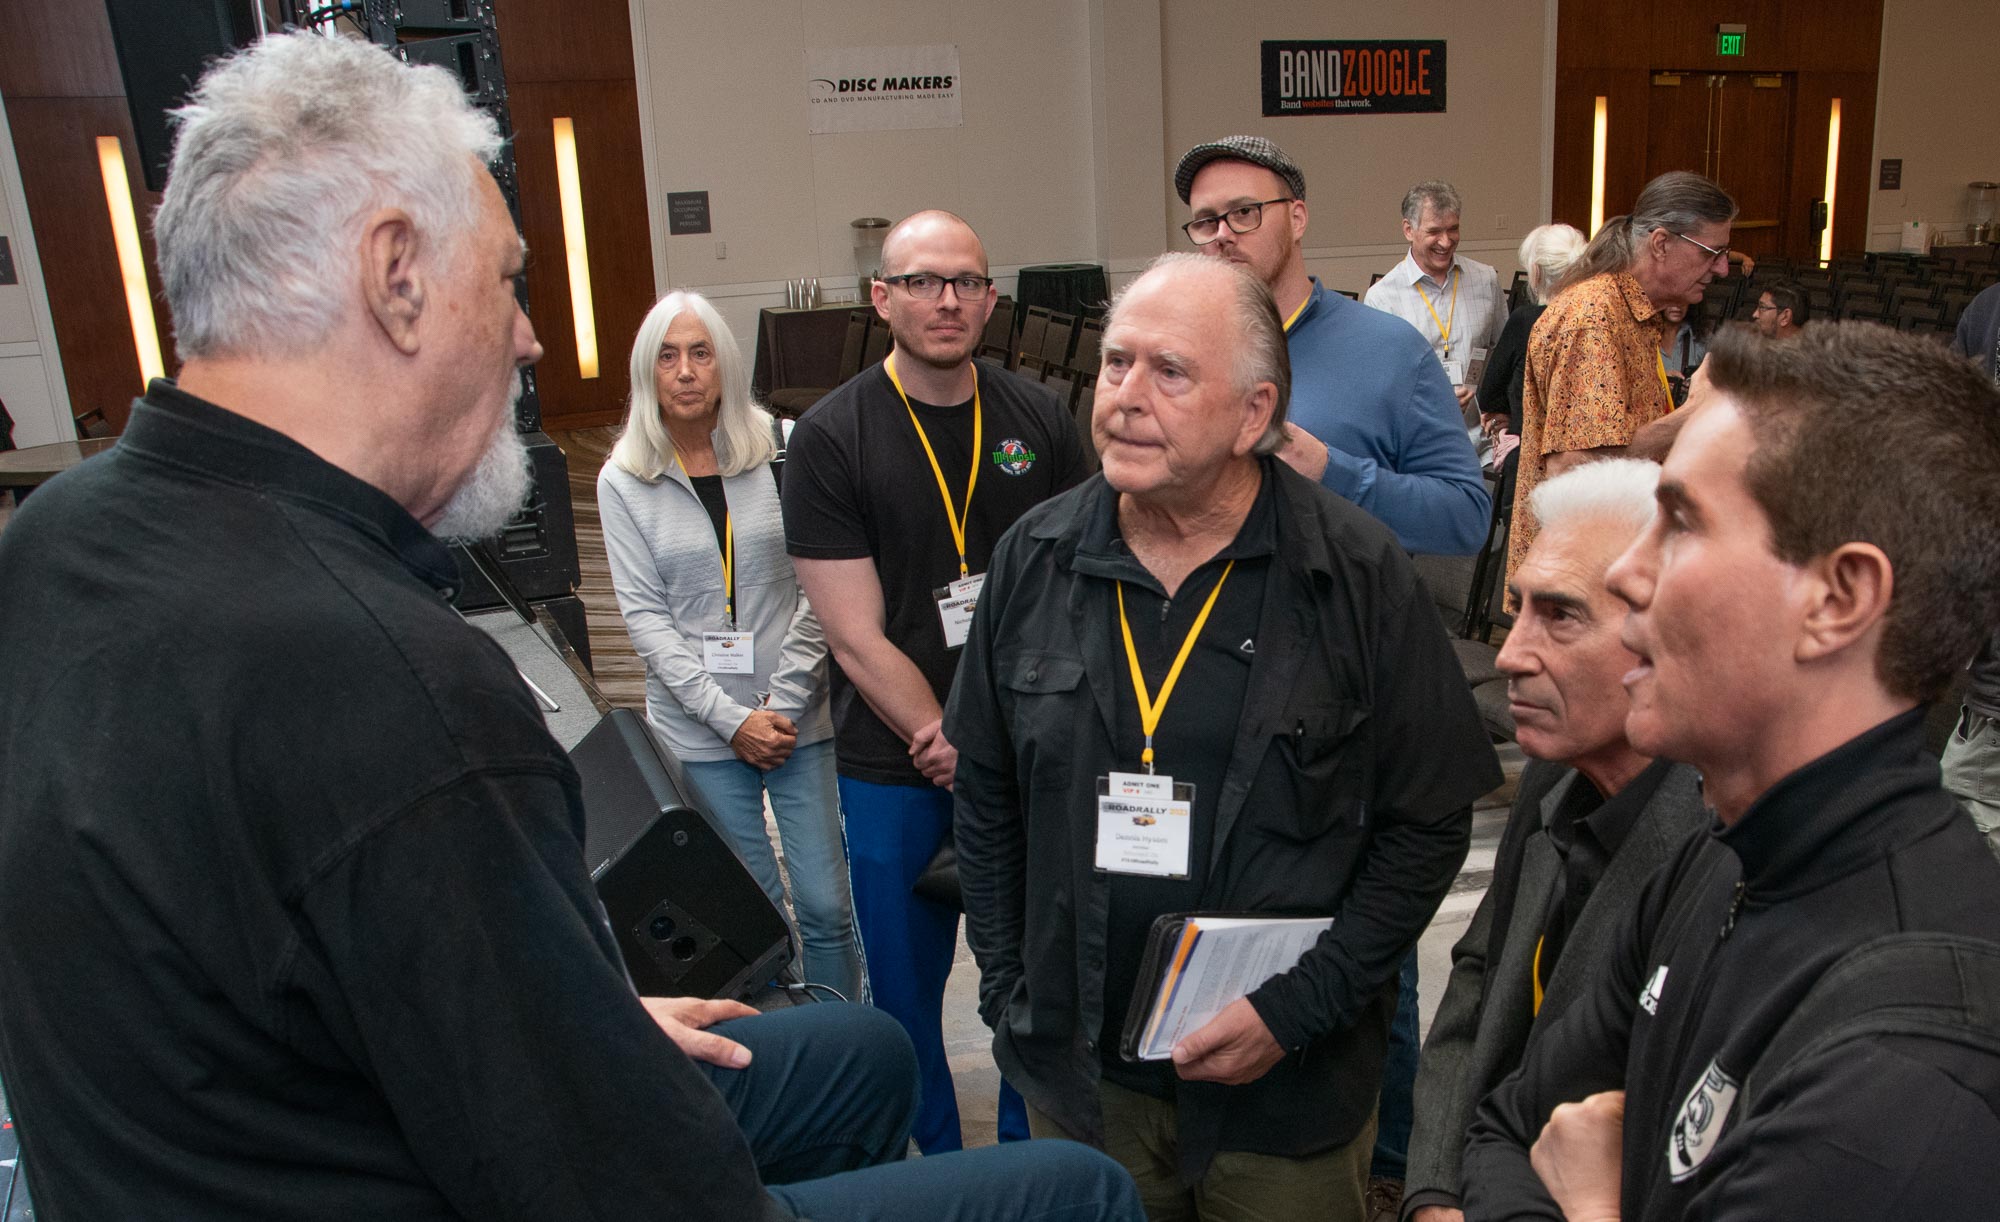 Nashville Publisher, Steve Bloch (left) definitely has the attention of these members as he imparts some Music Row wisdom.